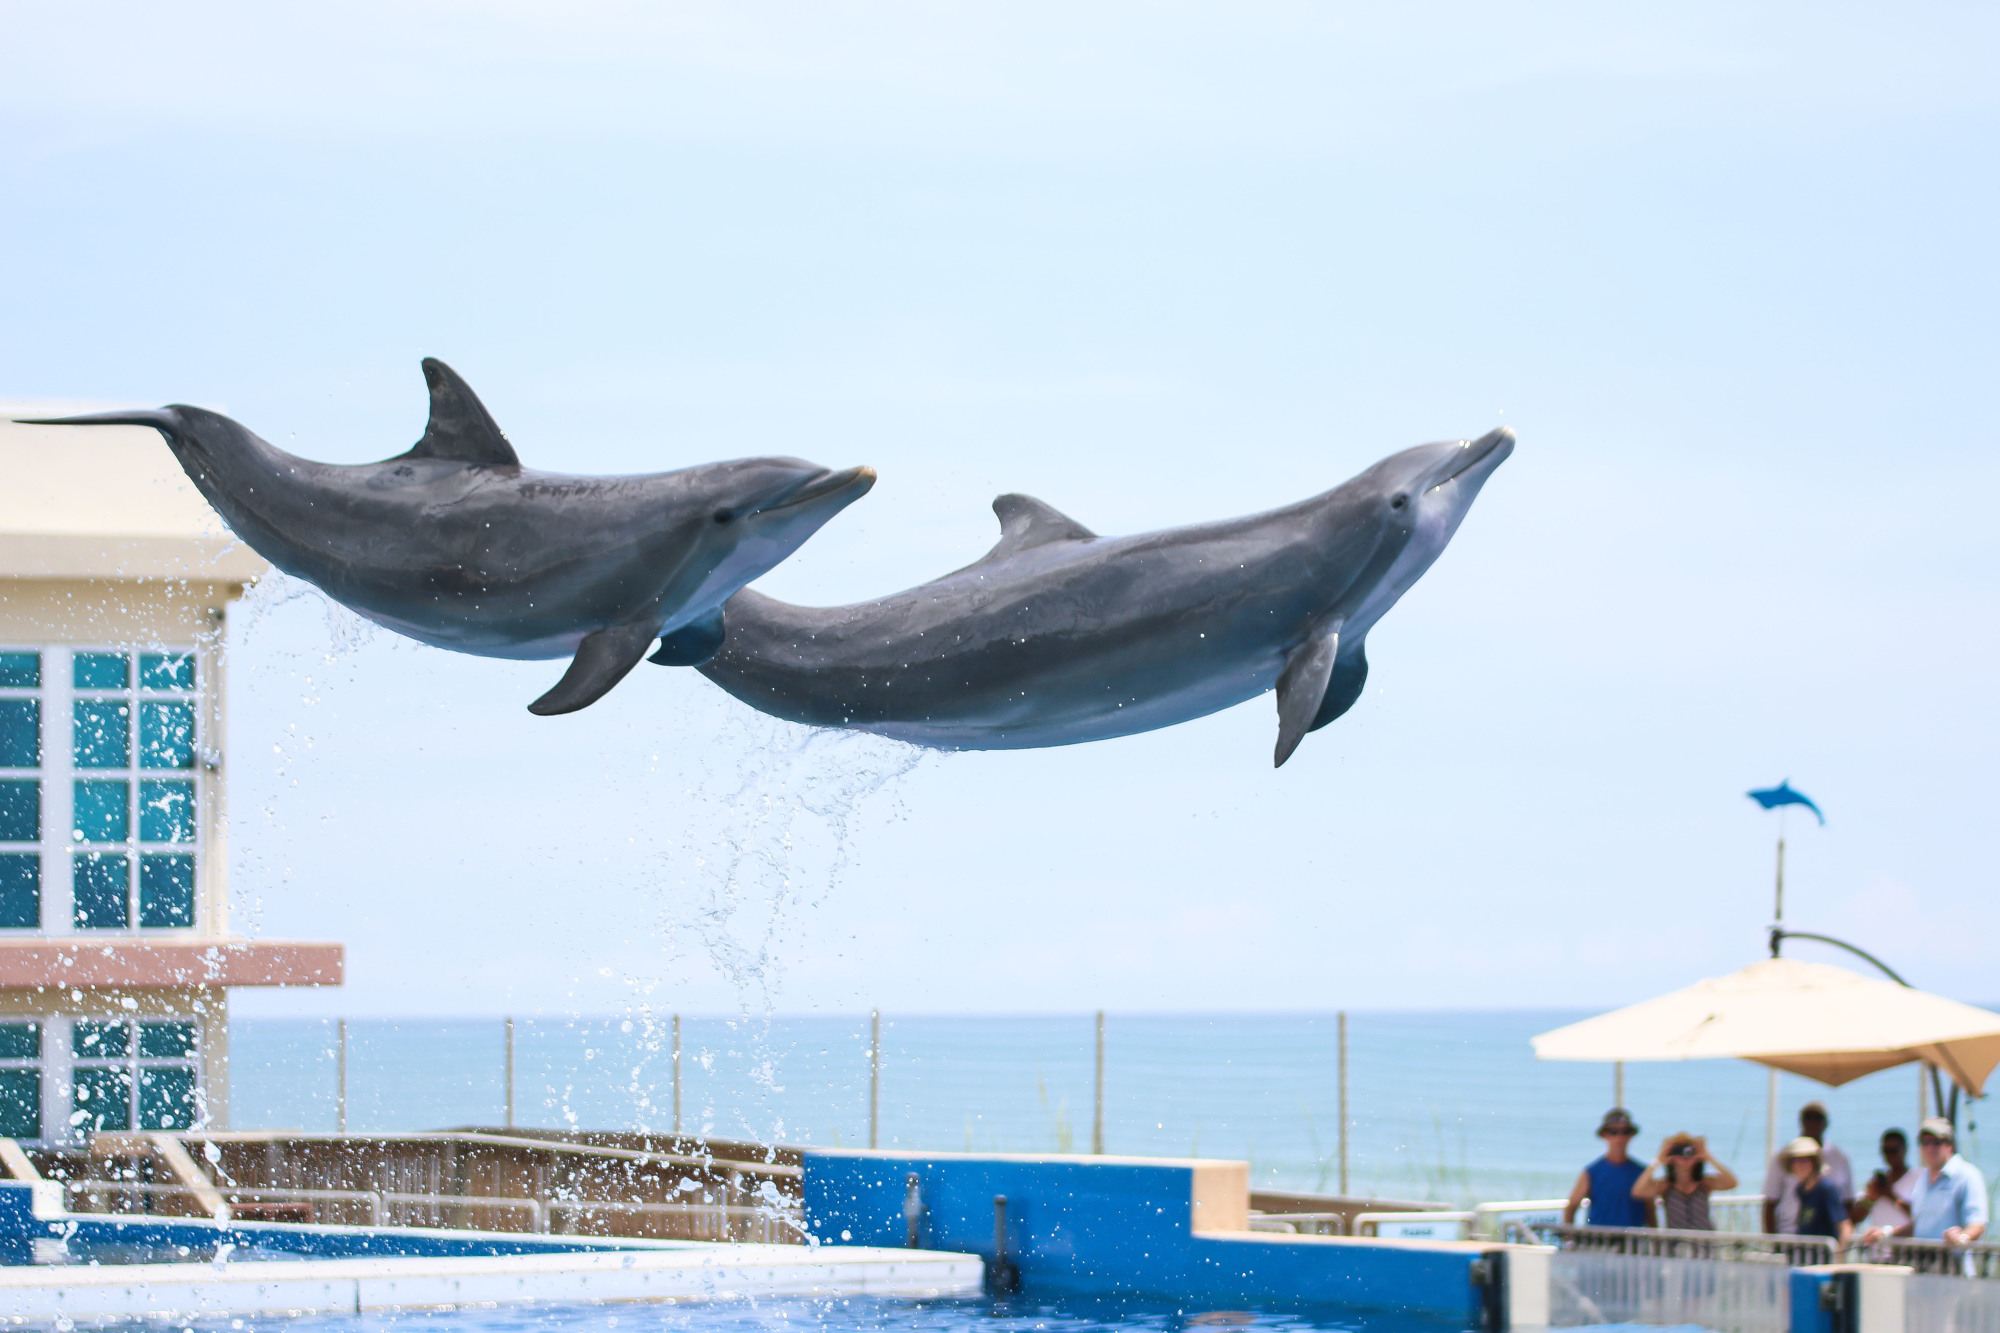 Coquina and Casique jump gracefully out of the water as spectators watch. The trainers use a specific hand signal to instruct the dolphins to jump for exercise purposes. Photo by Paige Wilson